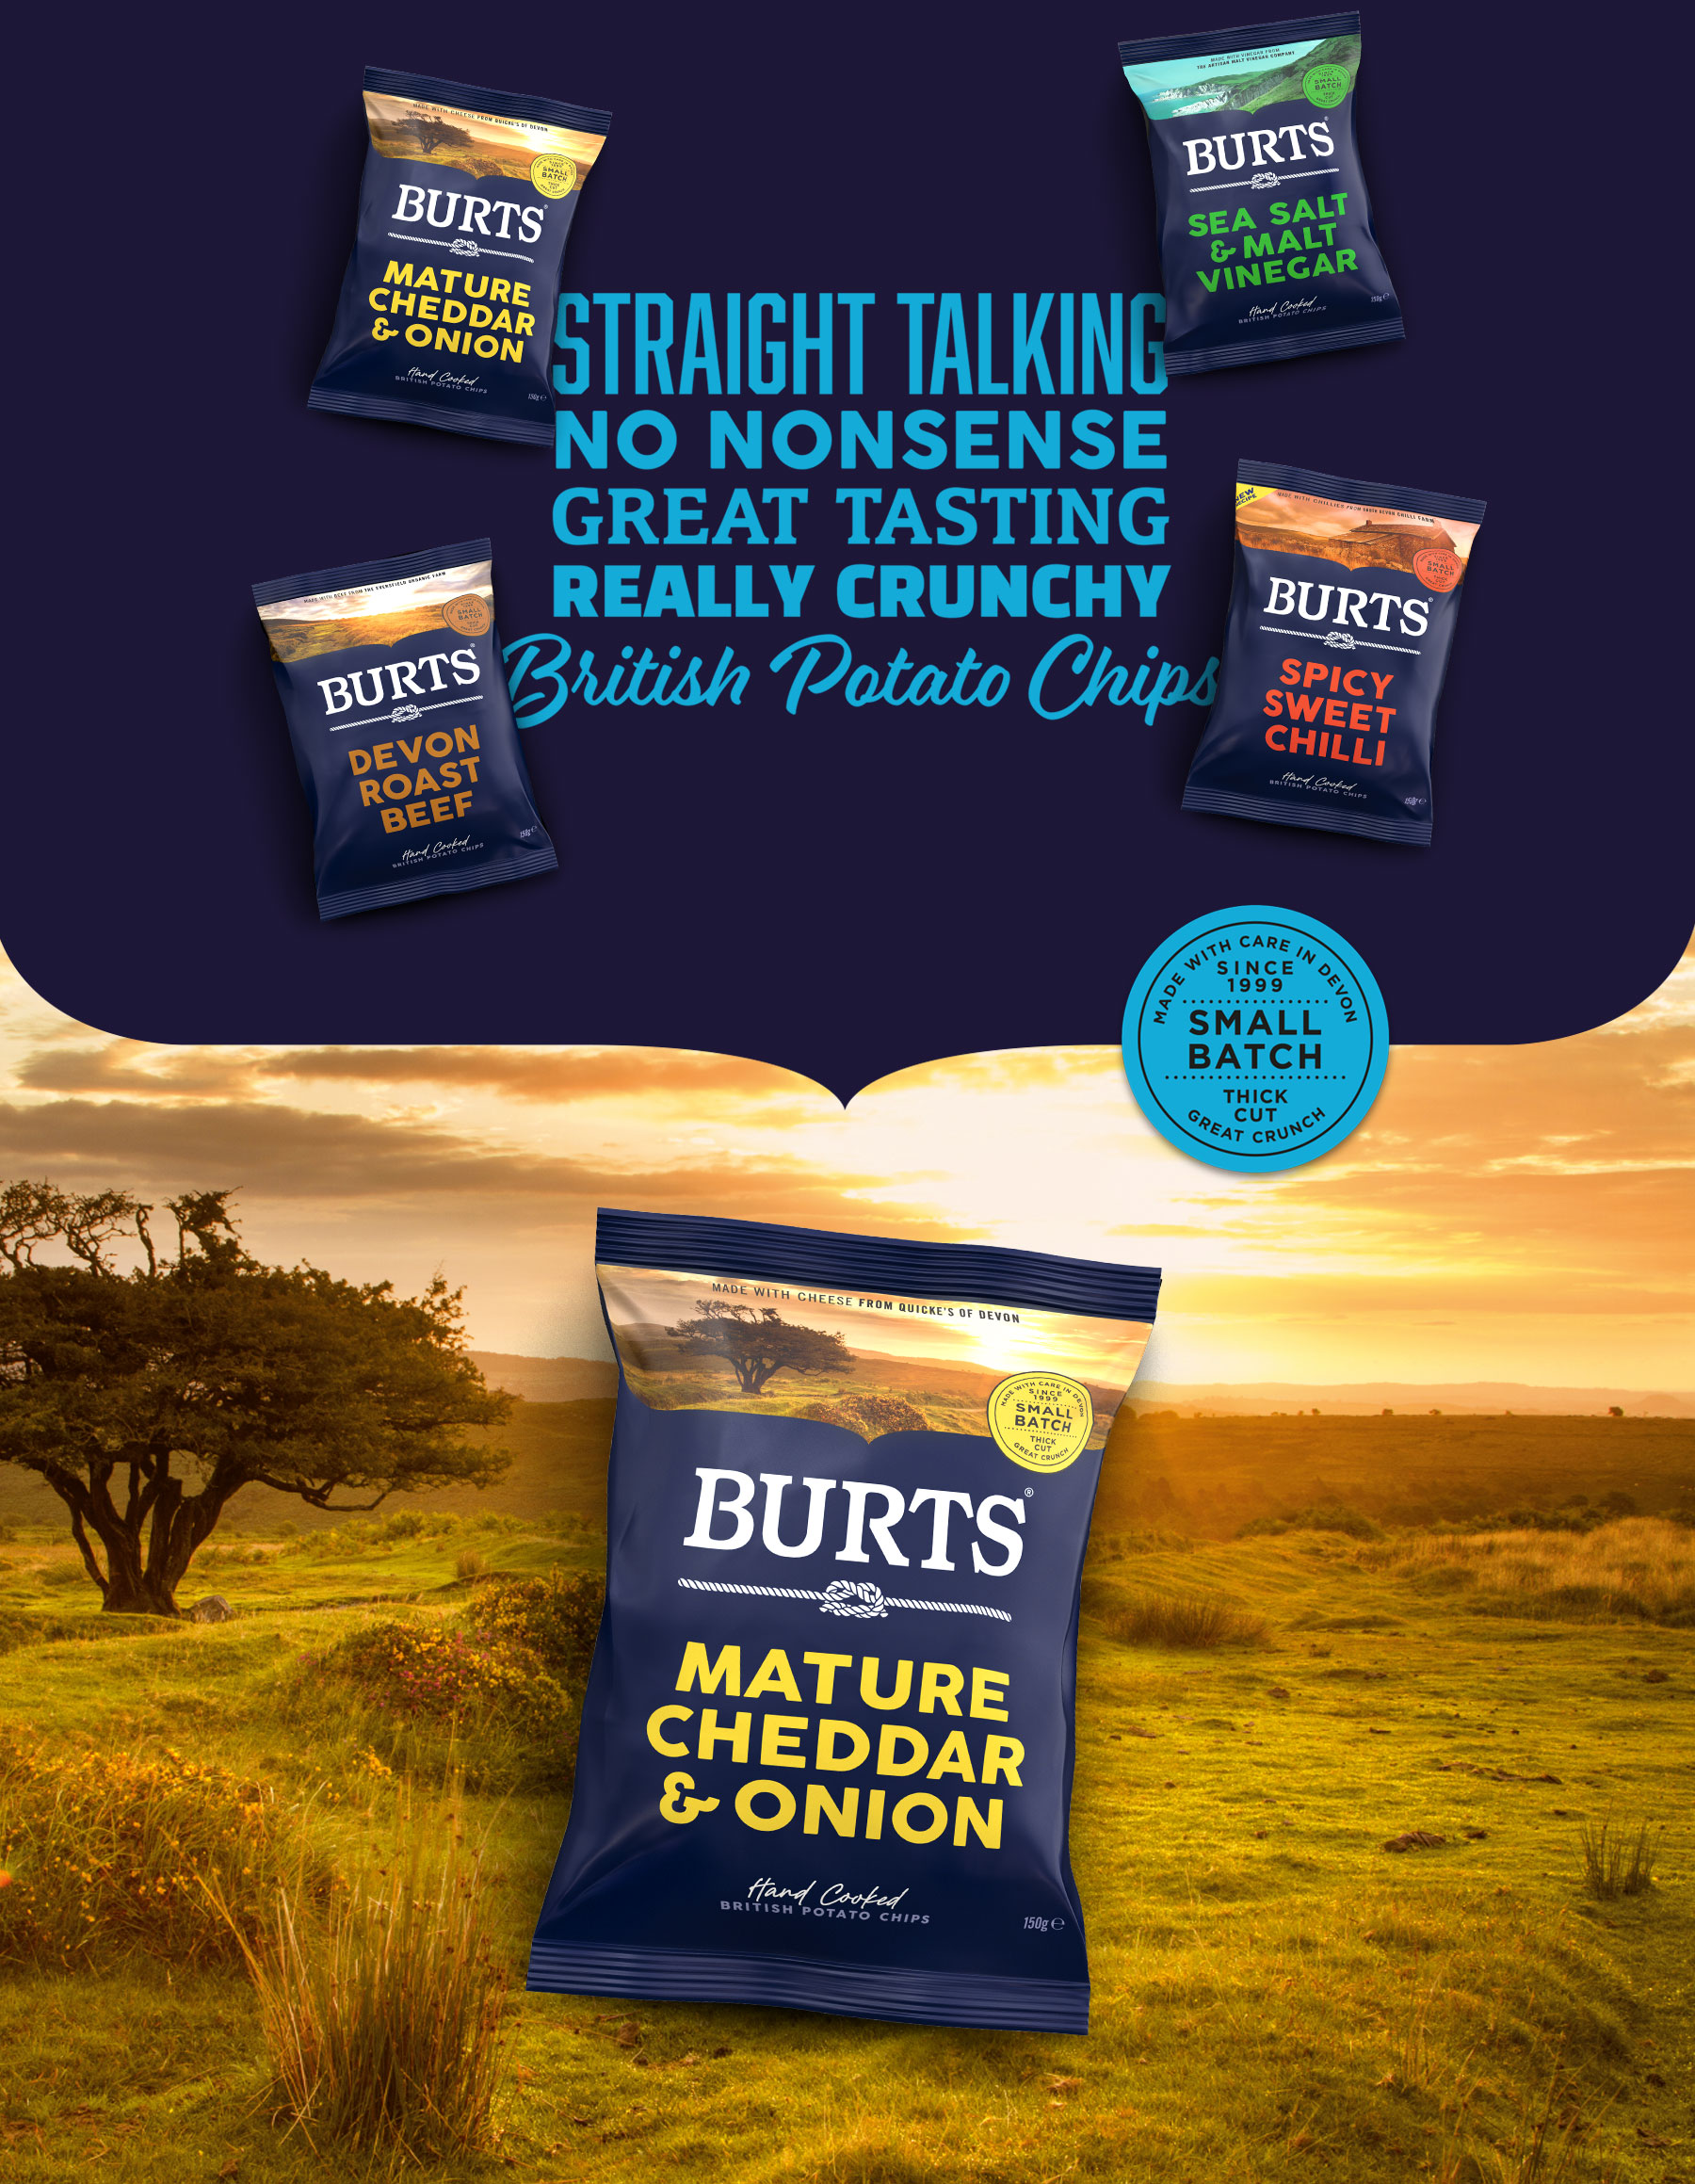 Burts core packs on blue with Burts copy. Second image shows the Burts core cheddar & onion pack on a Devon landscape. Design by Biles Hendry